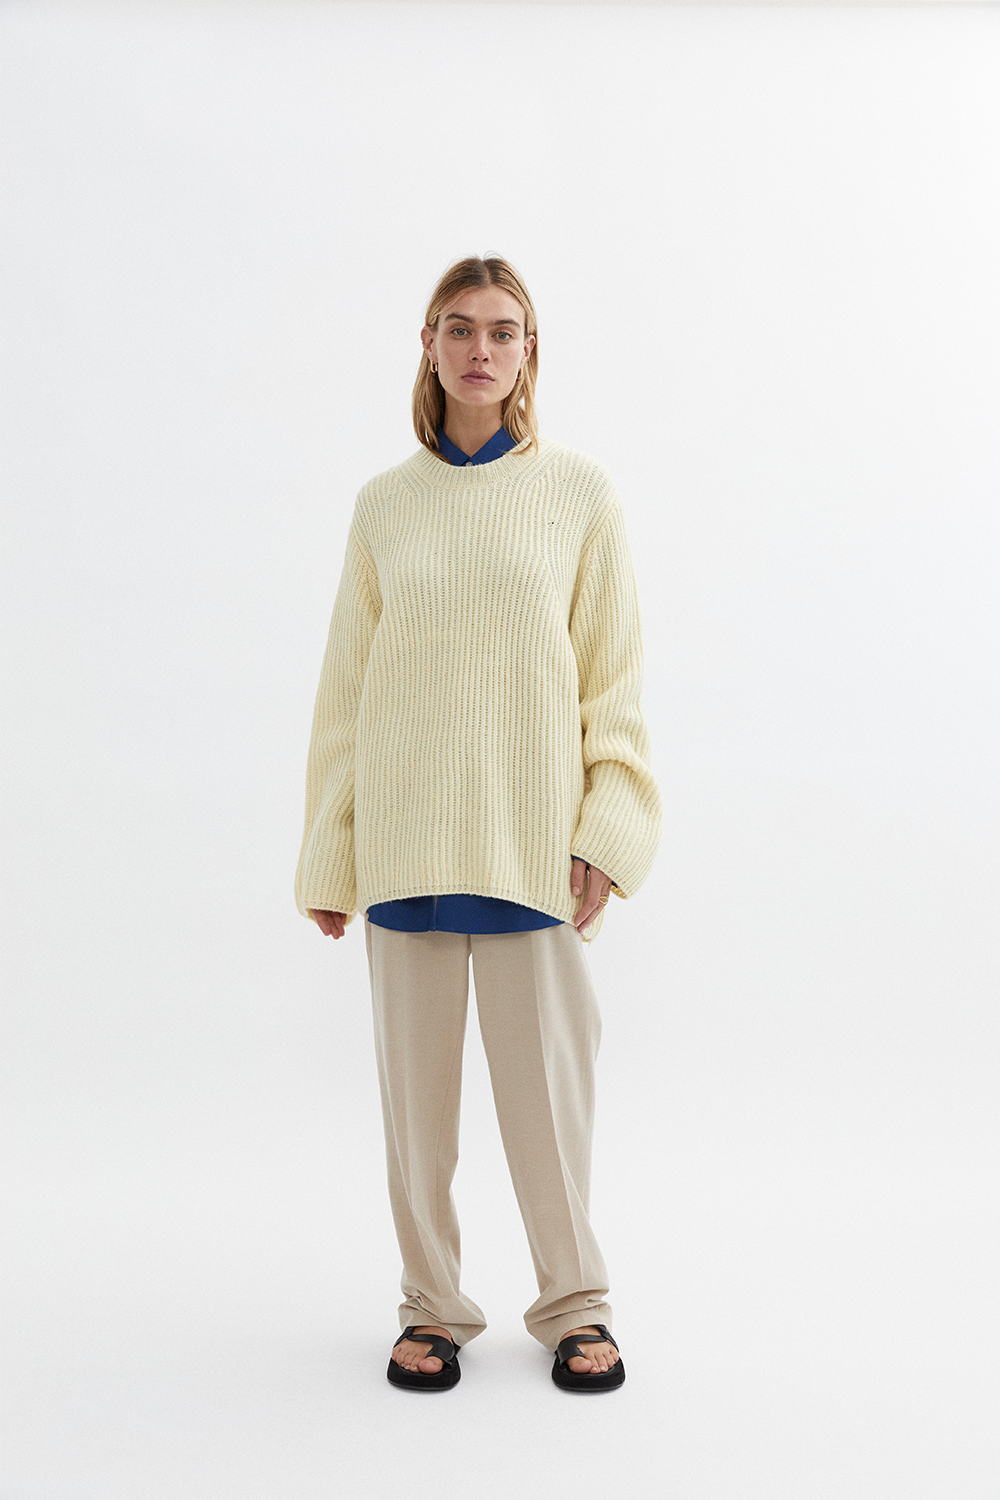 Sally Sweater in Butter - BLANCA